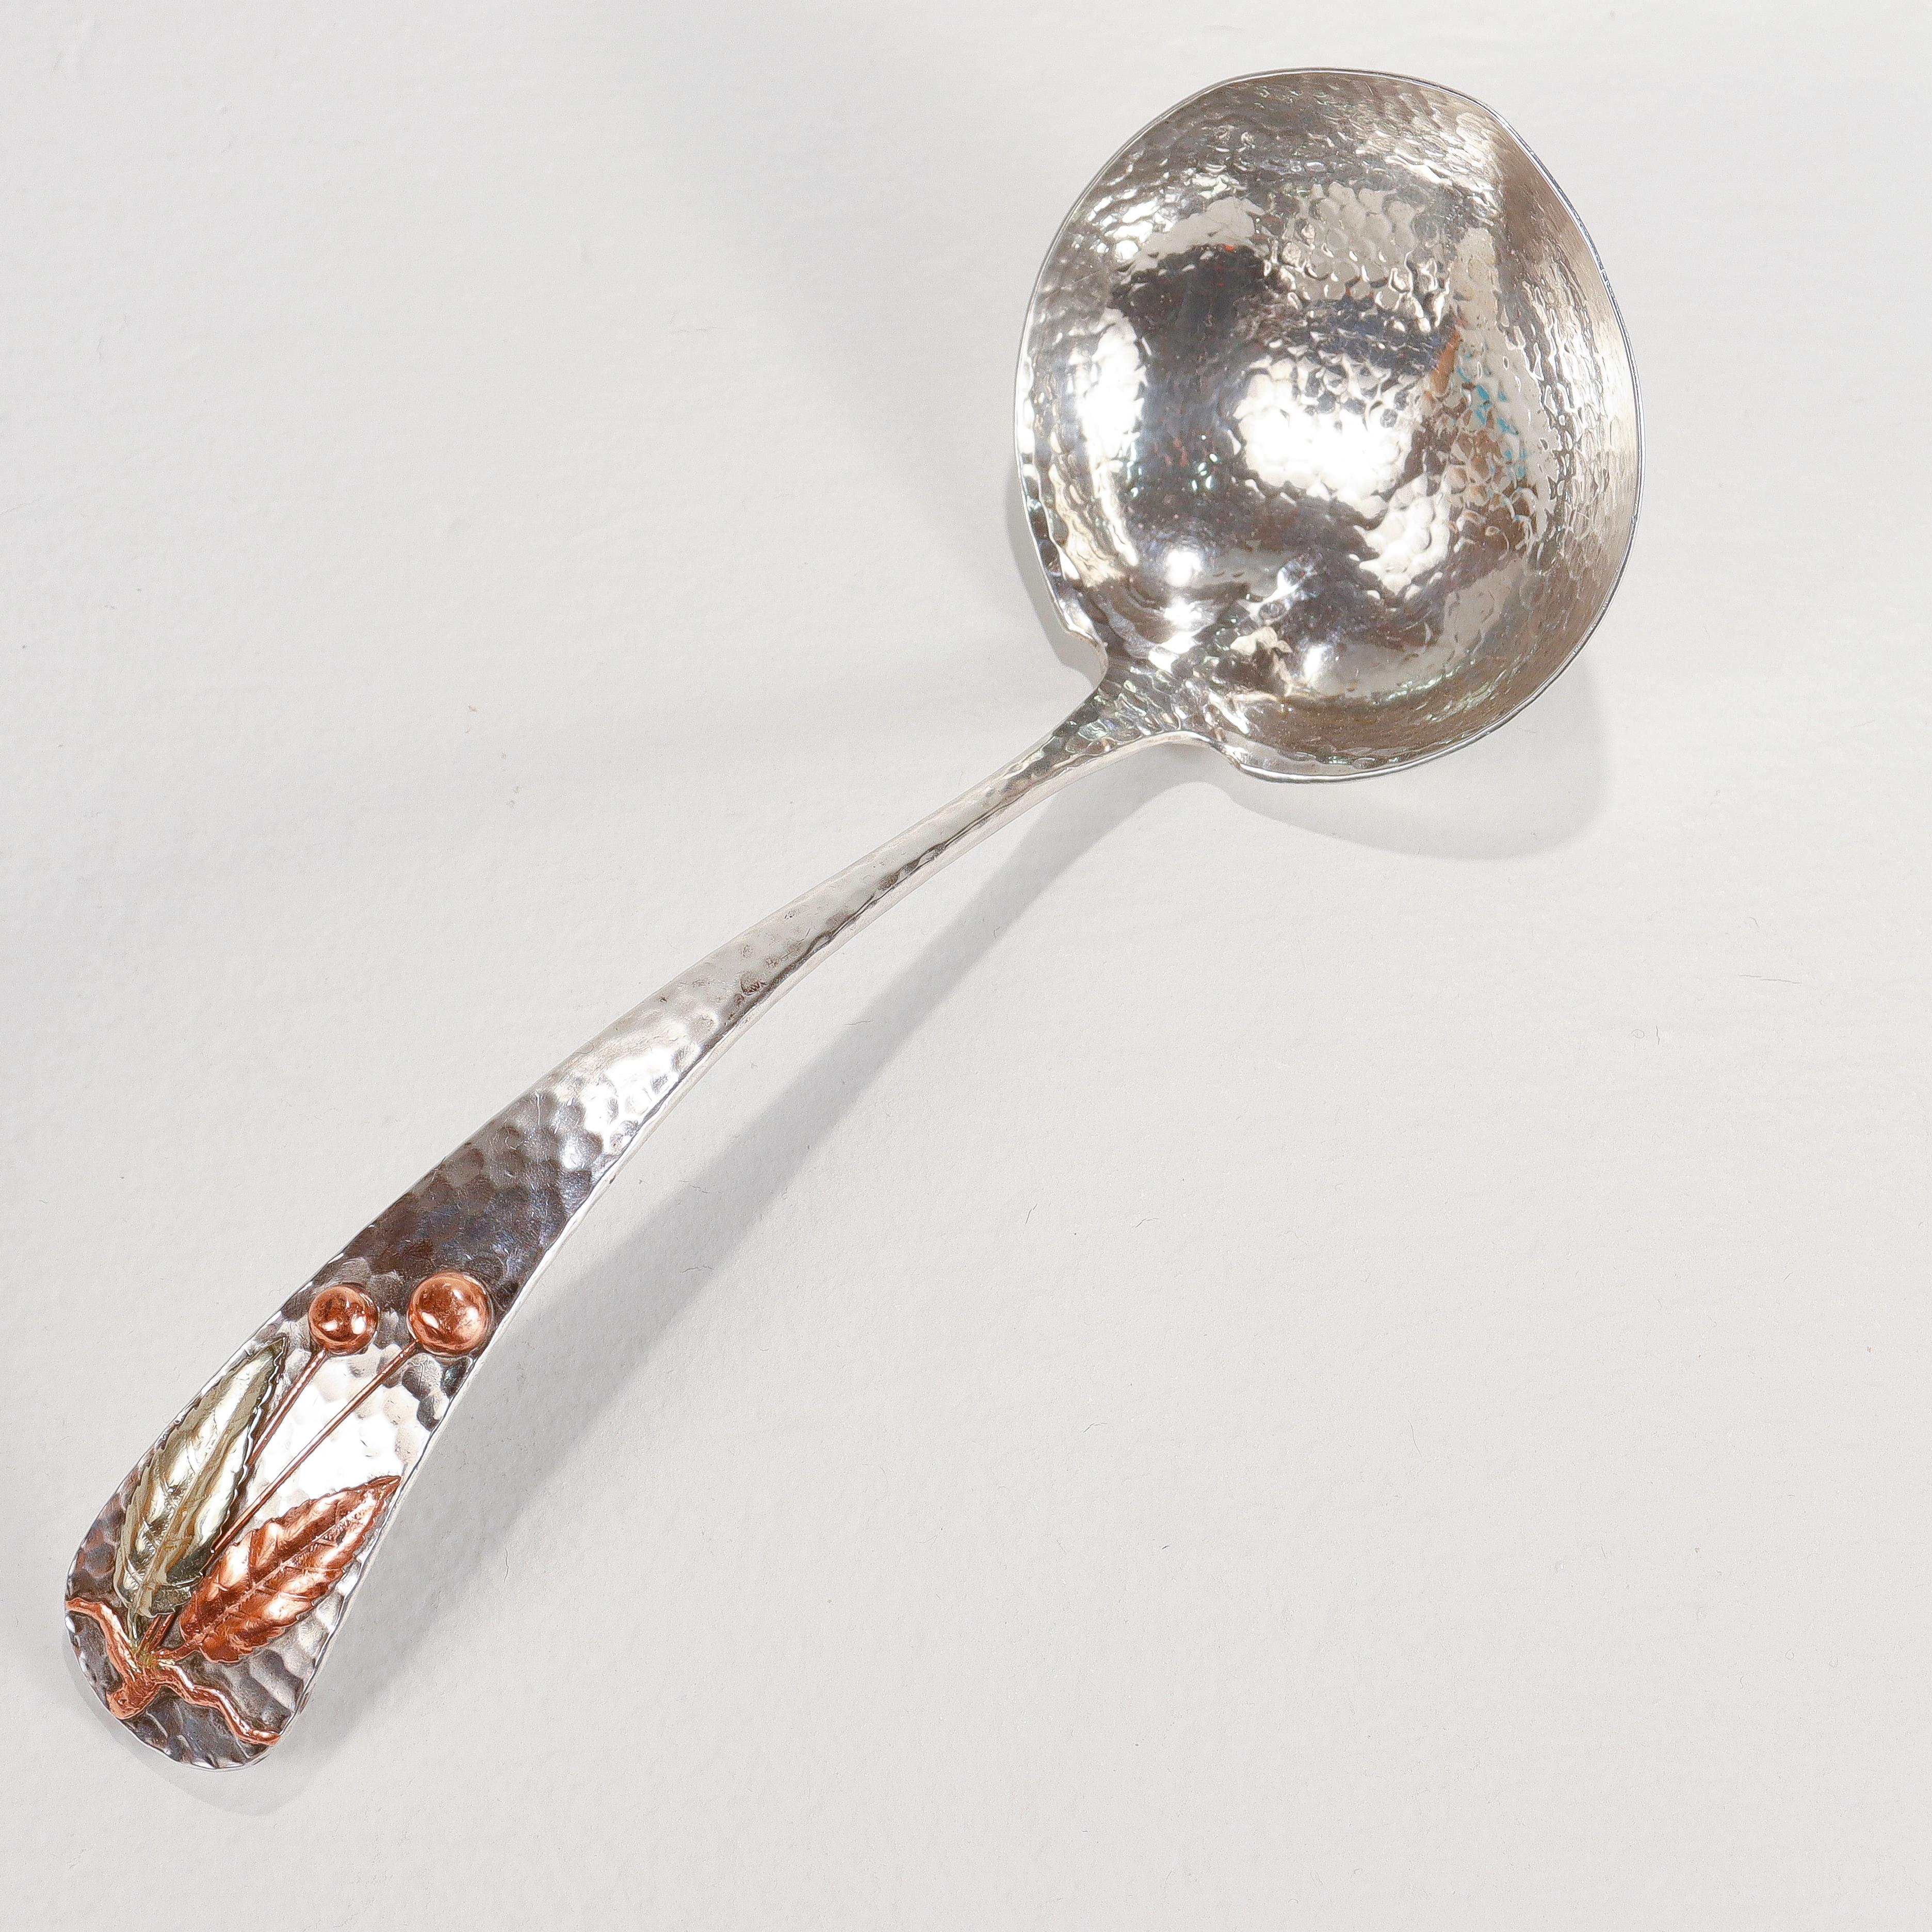 A fine antique silver and 'other' metals ladle.

By Gorham.

In sterling silver copper with applied copper and gilt silver leaves & cherries.

With a hand-hammered surface.

Simply a wonderful Gorham mixed metals ladle!

Date:
1880s

Overall